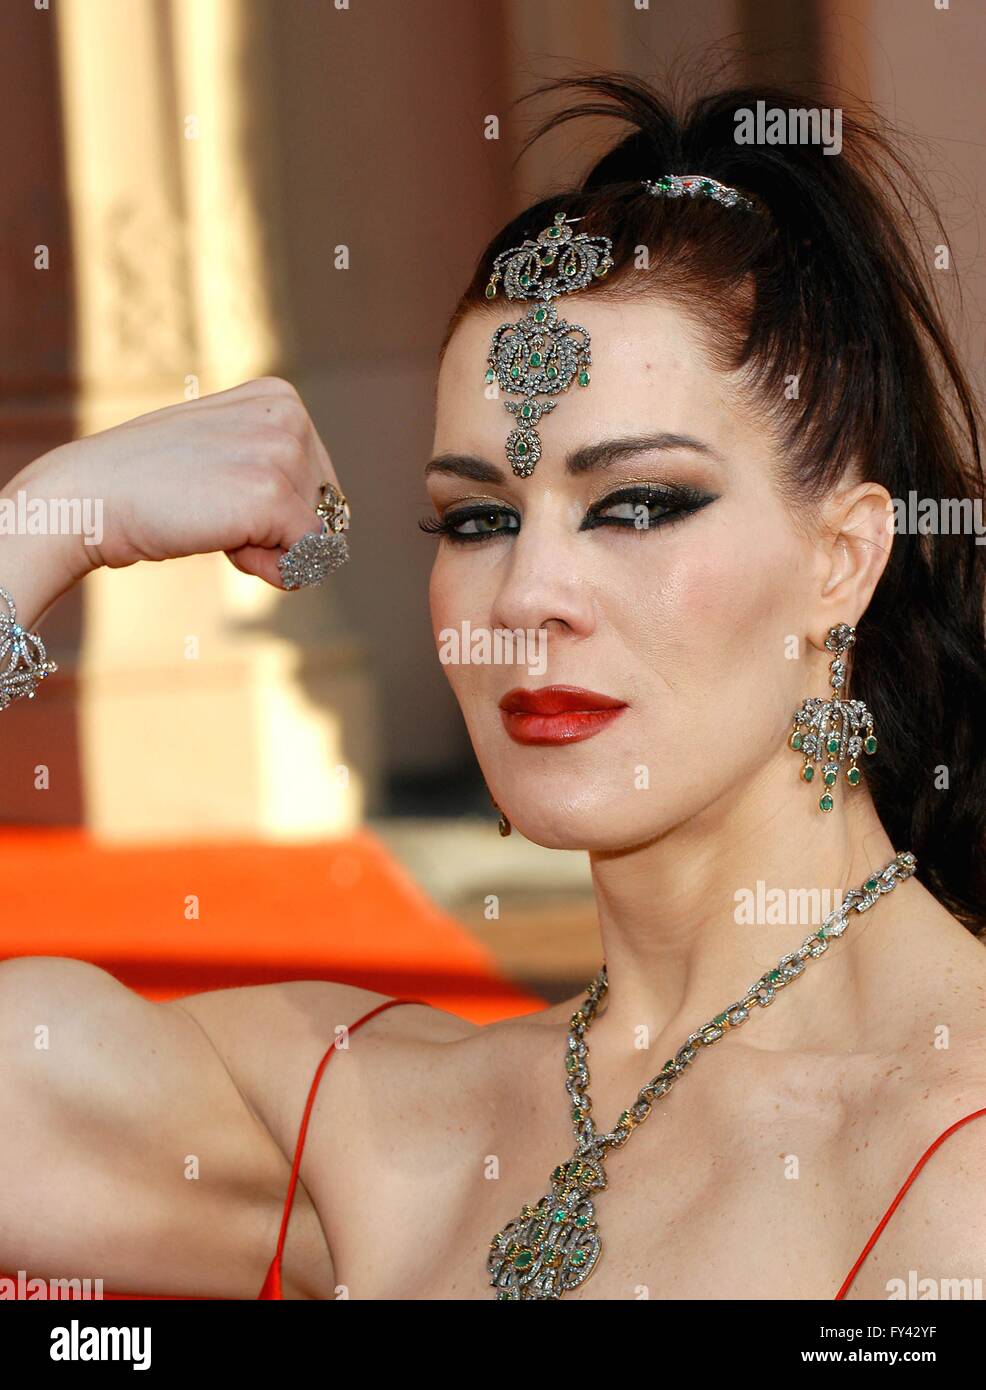 File. 20th Apr, 2016. CHYNA, wrestler and actress, was found dead Wednesday in her Redondo Beach home, no cause of death had been determined. She was 46. Born Joan Marie Laurer, aka WWF's '9th Wonder of the World.' After leaving the WWE in 2001, Laurer posed for Playboy and appeared in adult films and on reality TV. Pictured: Nov. 16, 2003 - Los Angeles, CA, USA - 31st Annual American Music Awards - Arrivals.Shrine Auditorium Joanie Laurer © Globe Photos/ZUMAPRESS.com/Alamy Live News Stock Photo